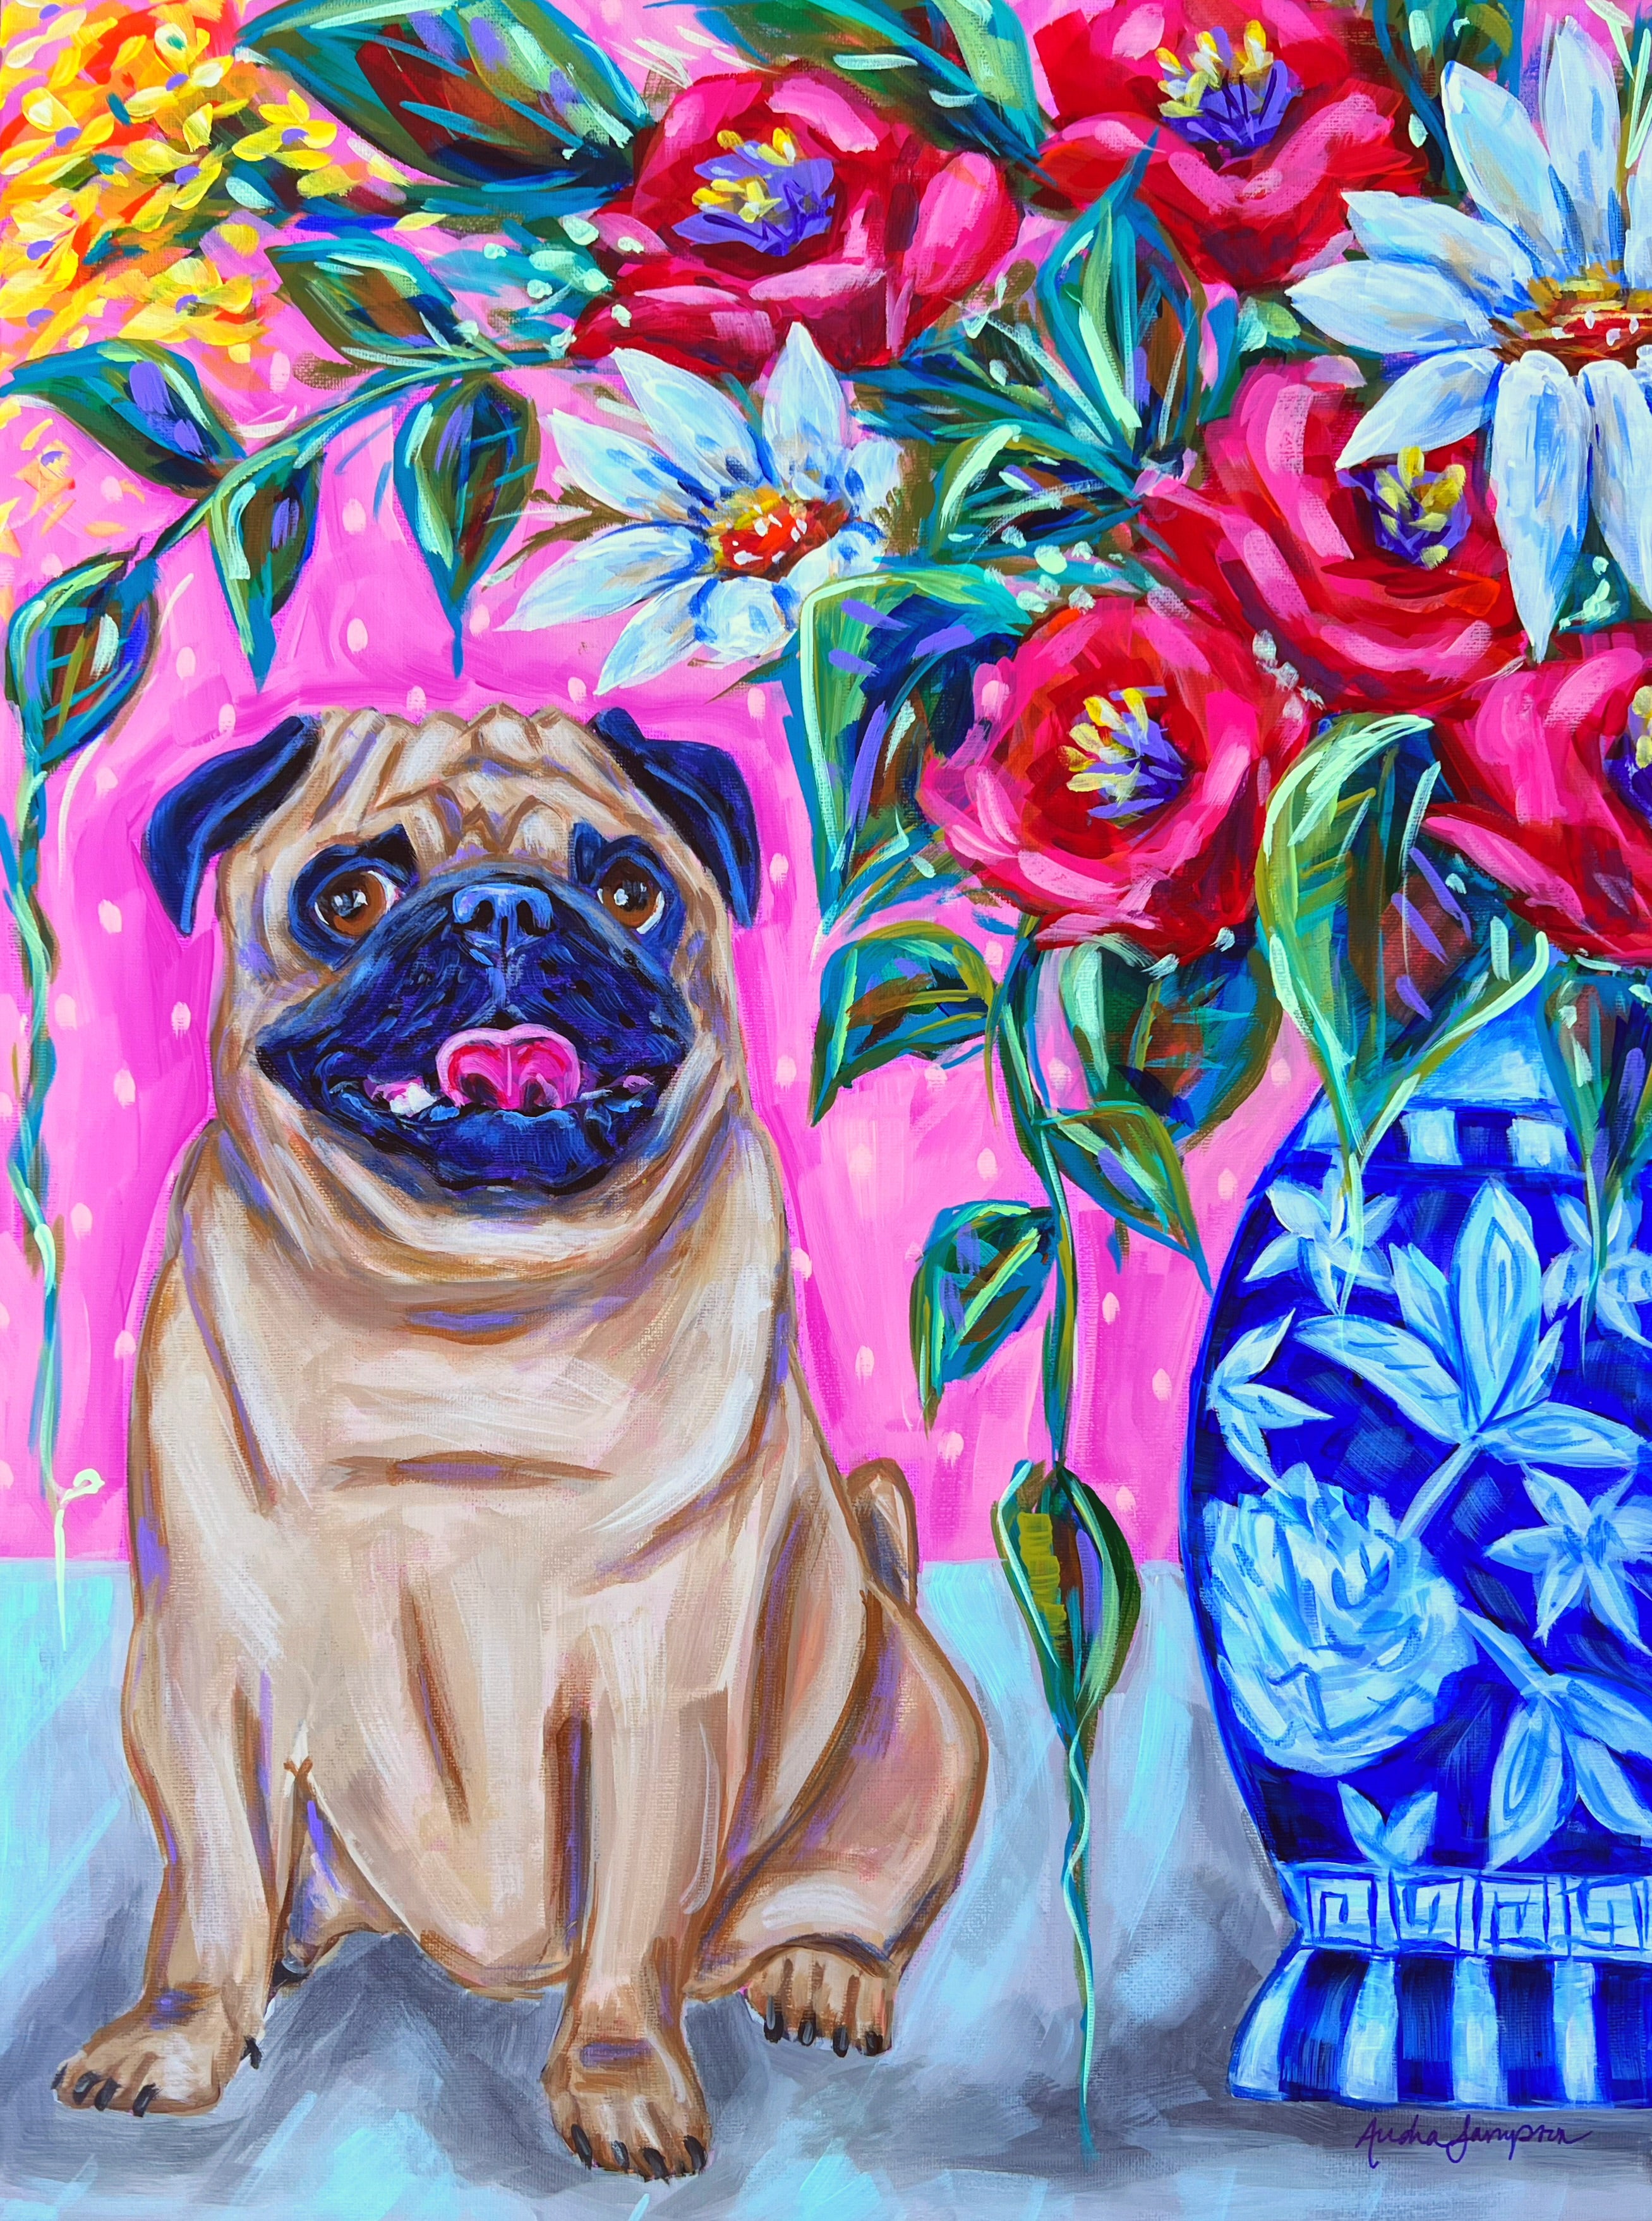 Pug and Bouquet 18x24" Original Painting on Canvas